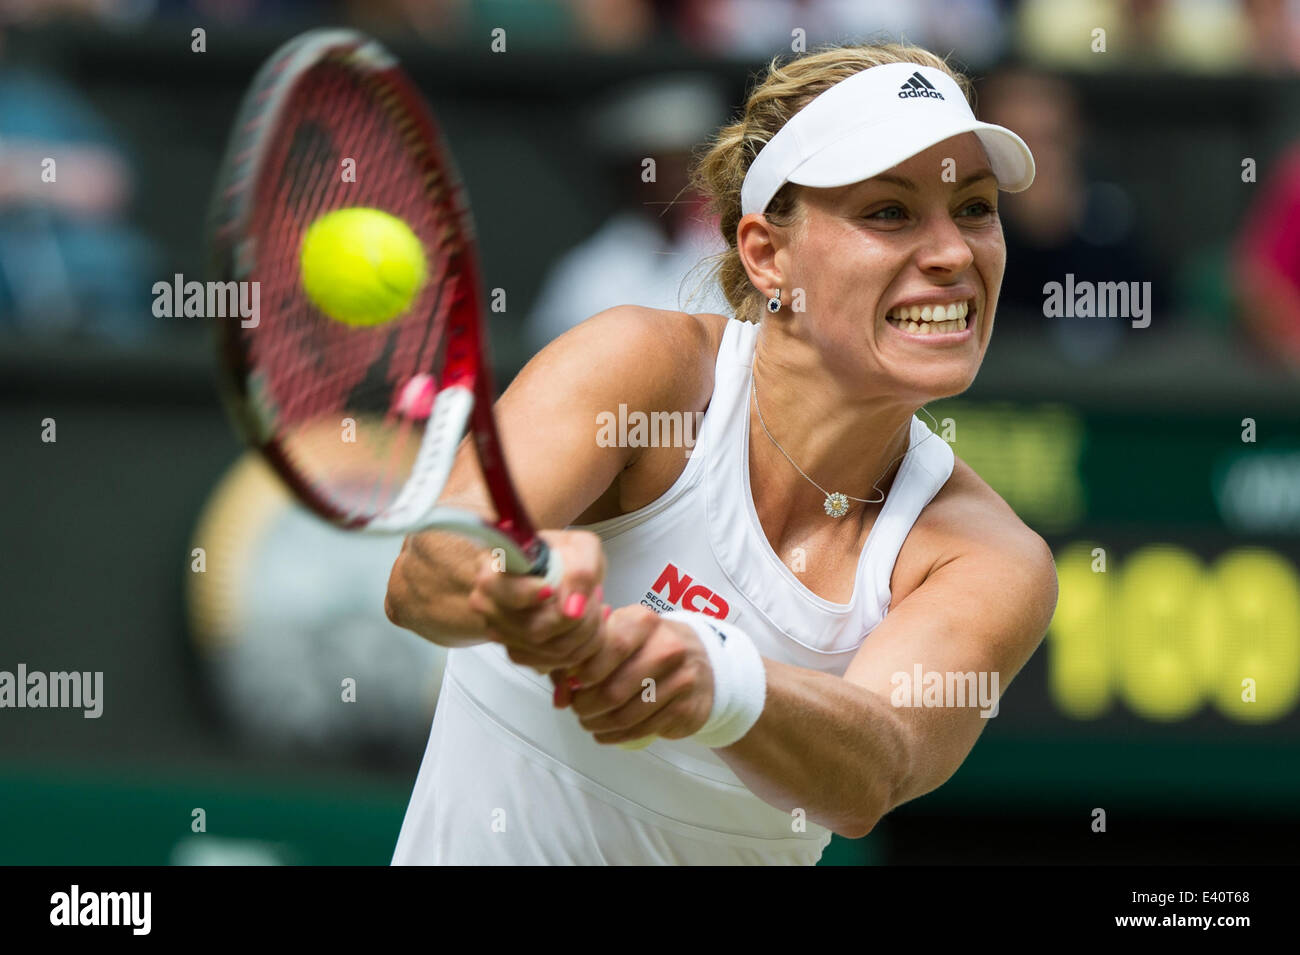 Wimbledon, London, UK. 1st July, 2014. Tennis: Wimbledon Championship 2014, Angelique Kerber of Germany during her Ladies' Singles fourth round match against Maria Sharapova of Russia on day eight of the Wimbledon Lawn Tennis Championships at the All England Lawn Tennis and Croquet Club at Wimbledon on July 1, 2014, London, England. Credit:  dpa picture alliance/Alamy Live News Stock Photo